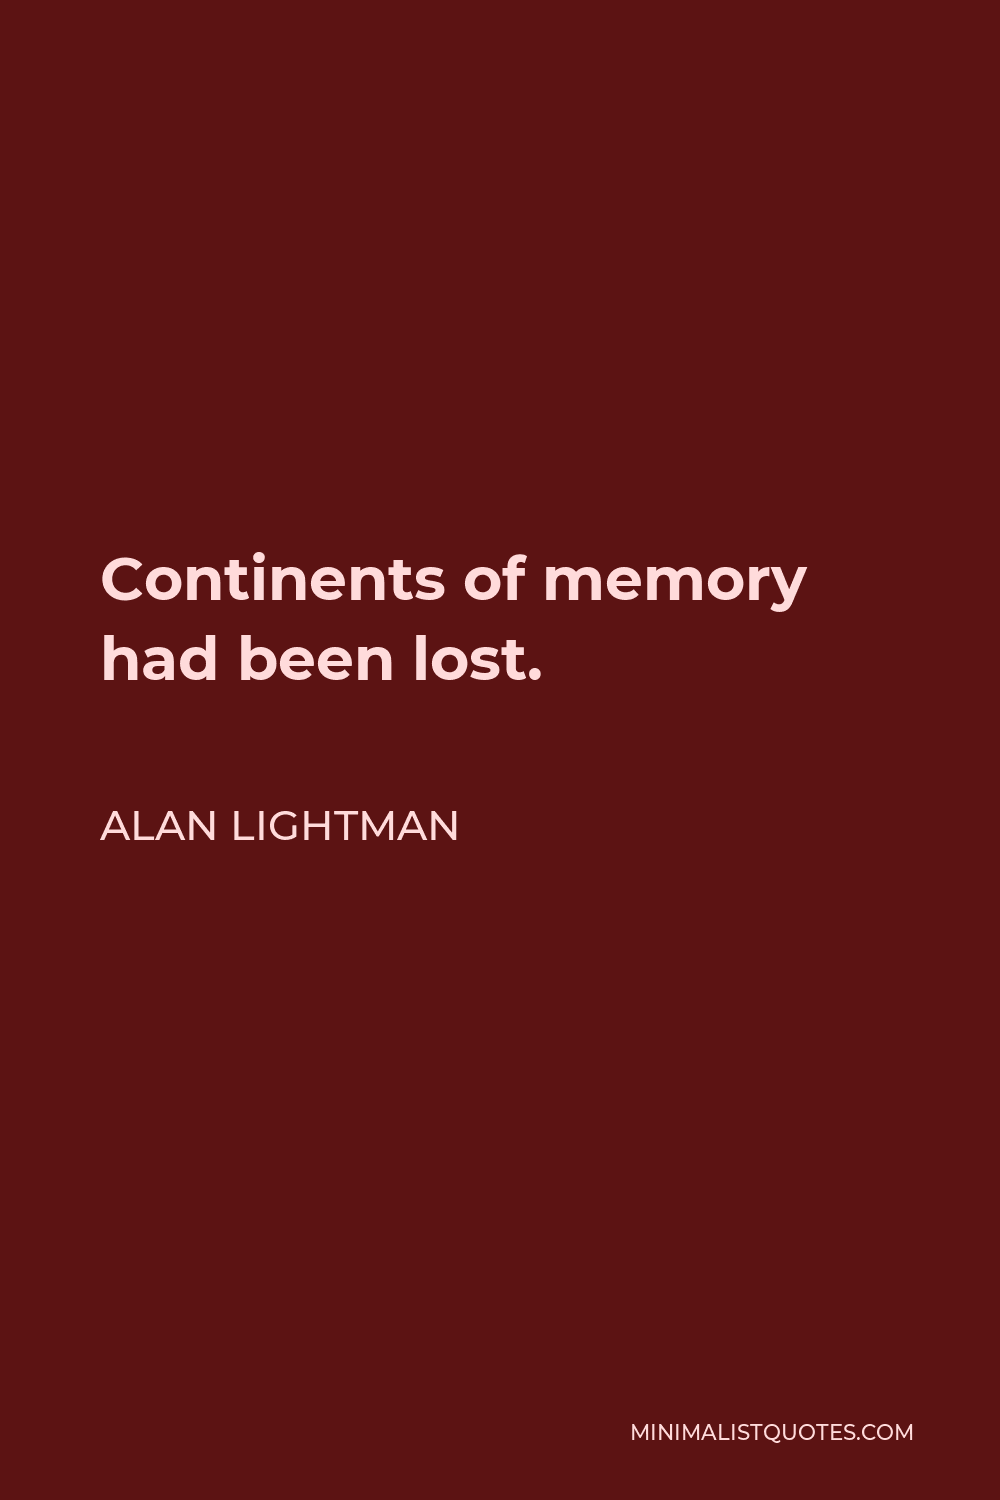 Alan Lightman Quote - Continents of memory had been lost.